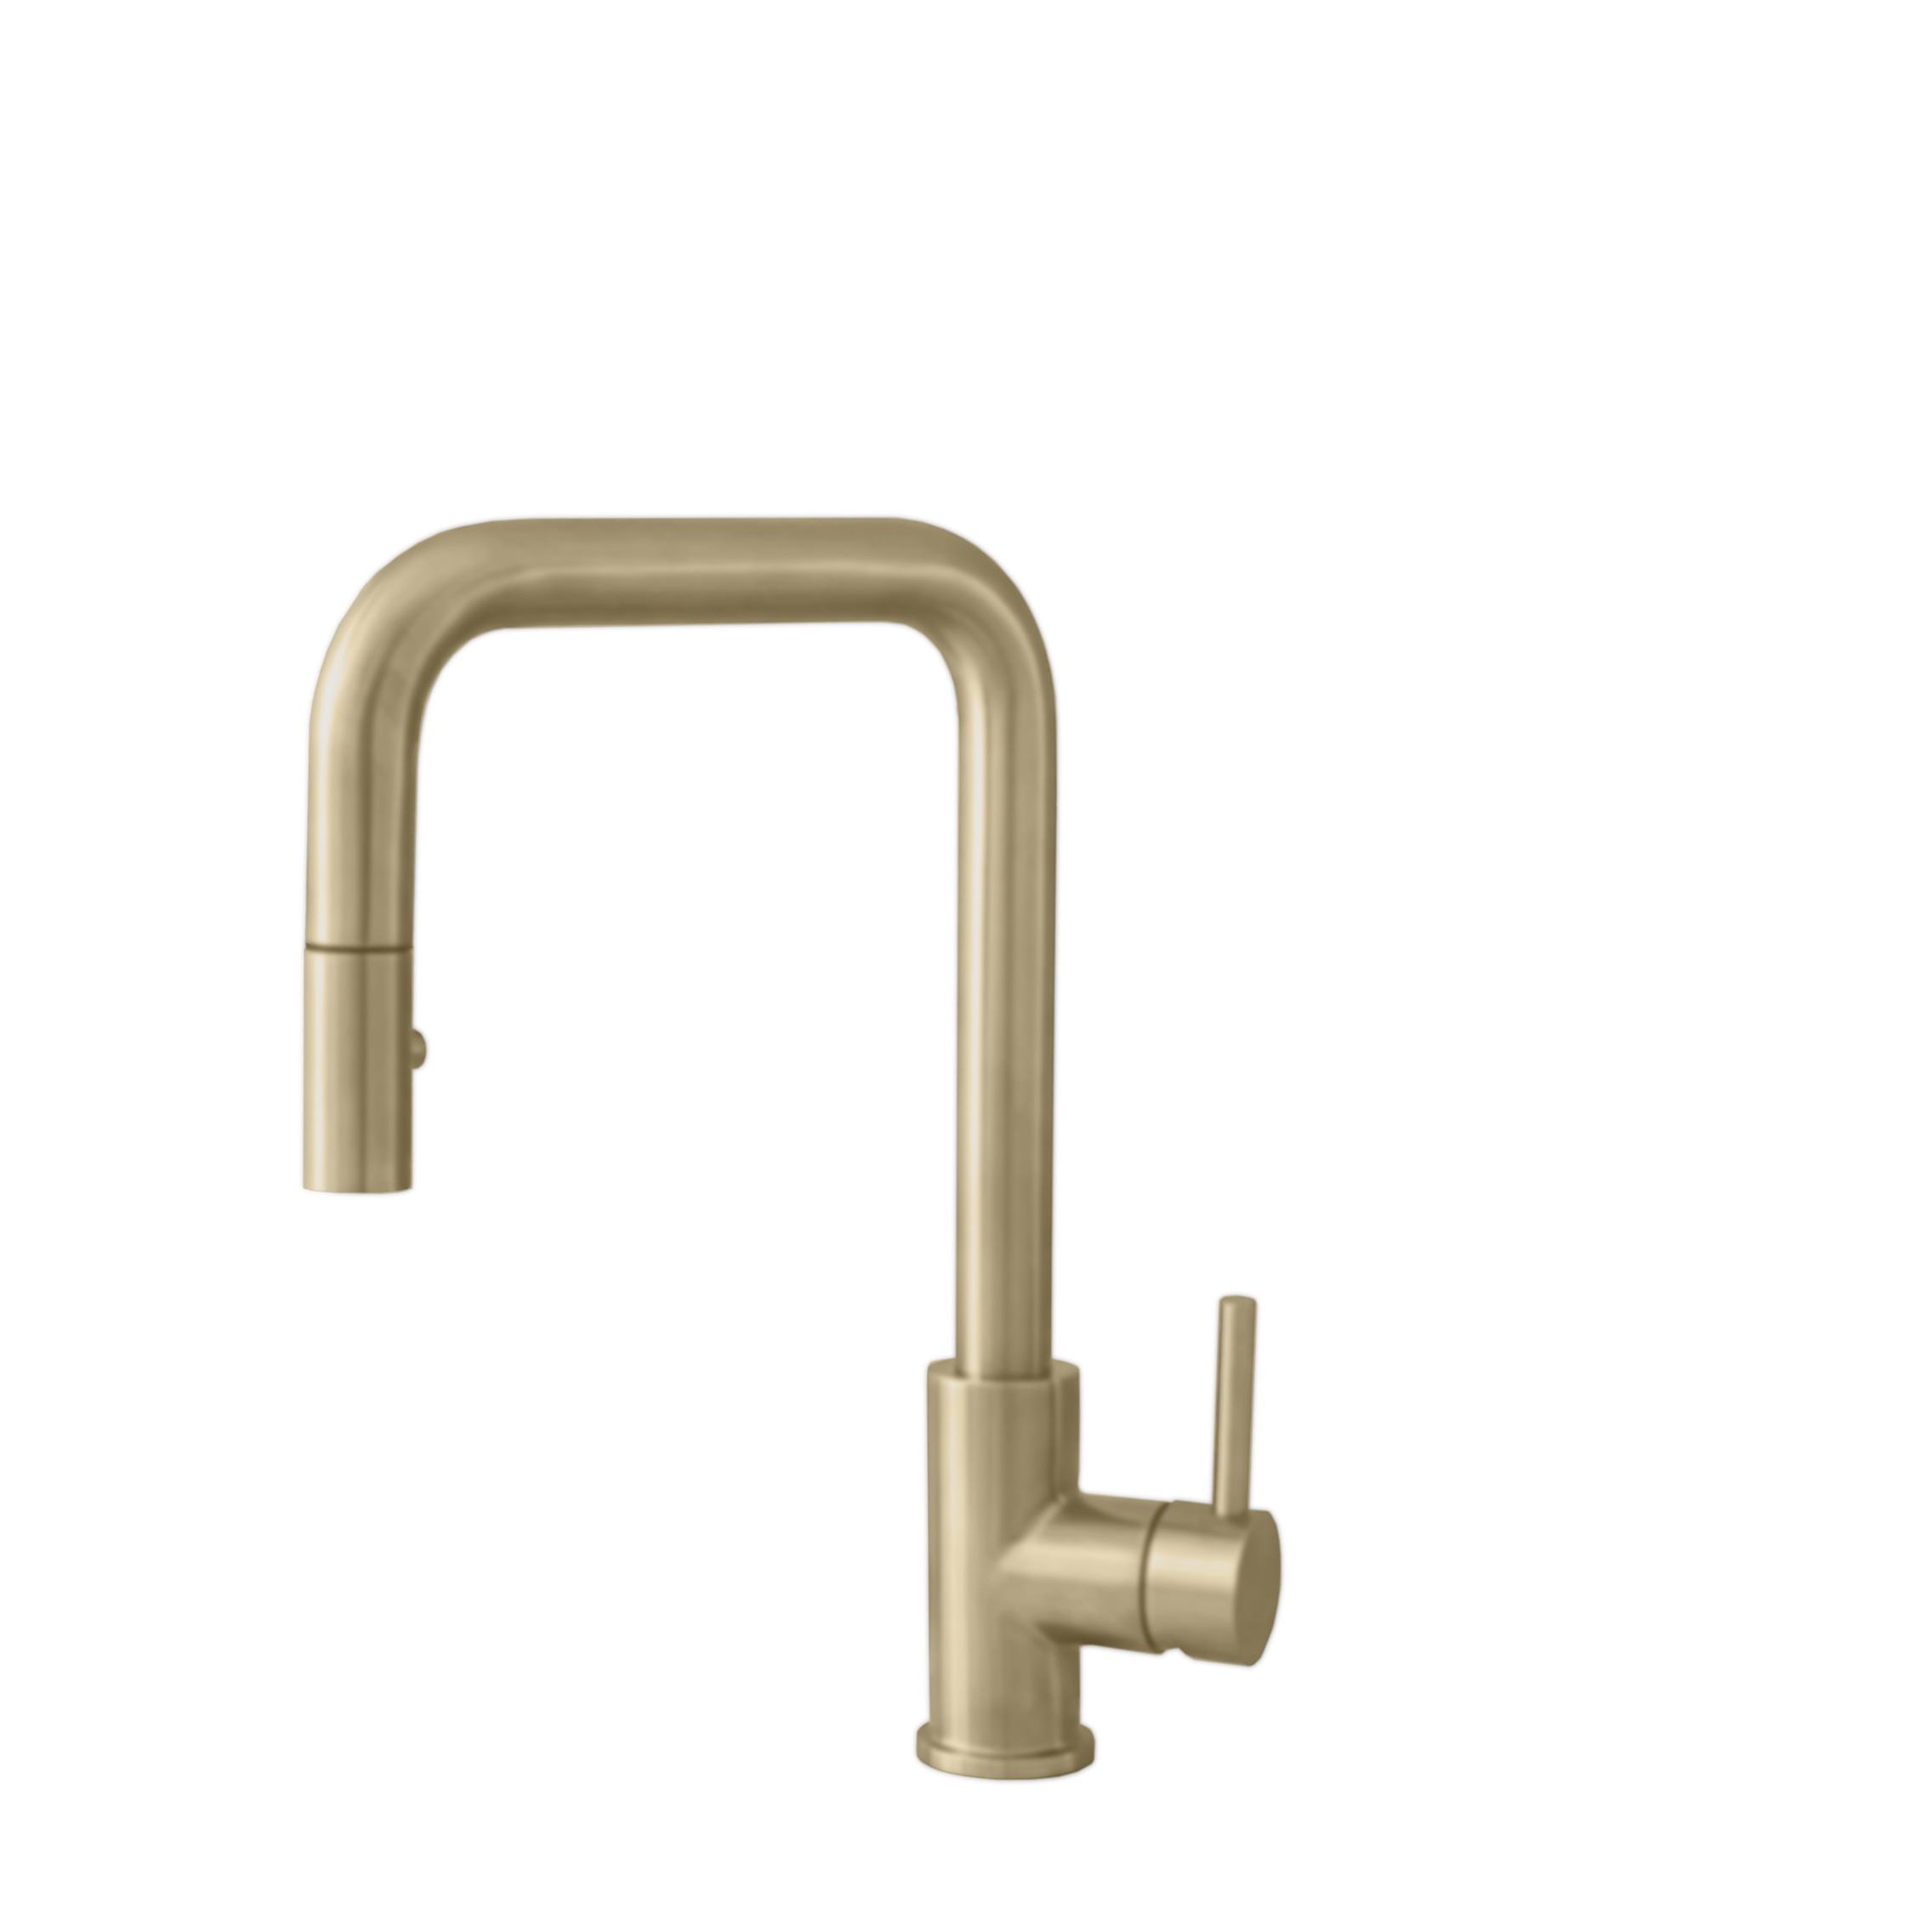 STYLISH Kitchen Sink Faucet Dual Mode Stainless Steel Brushed Gold Finish